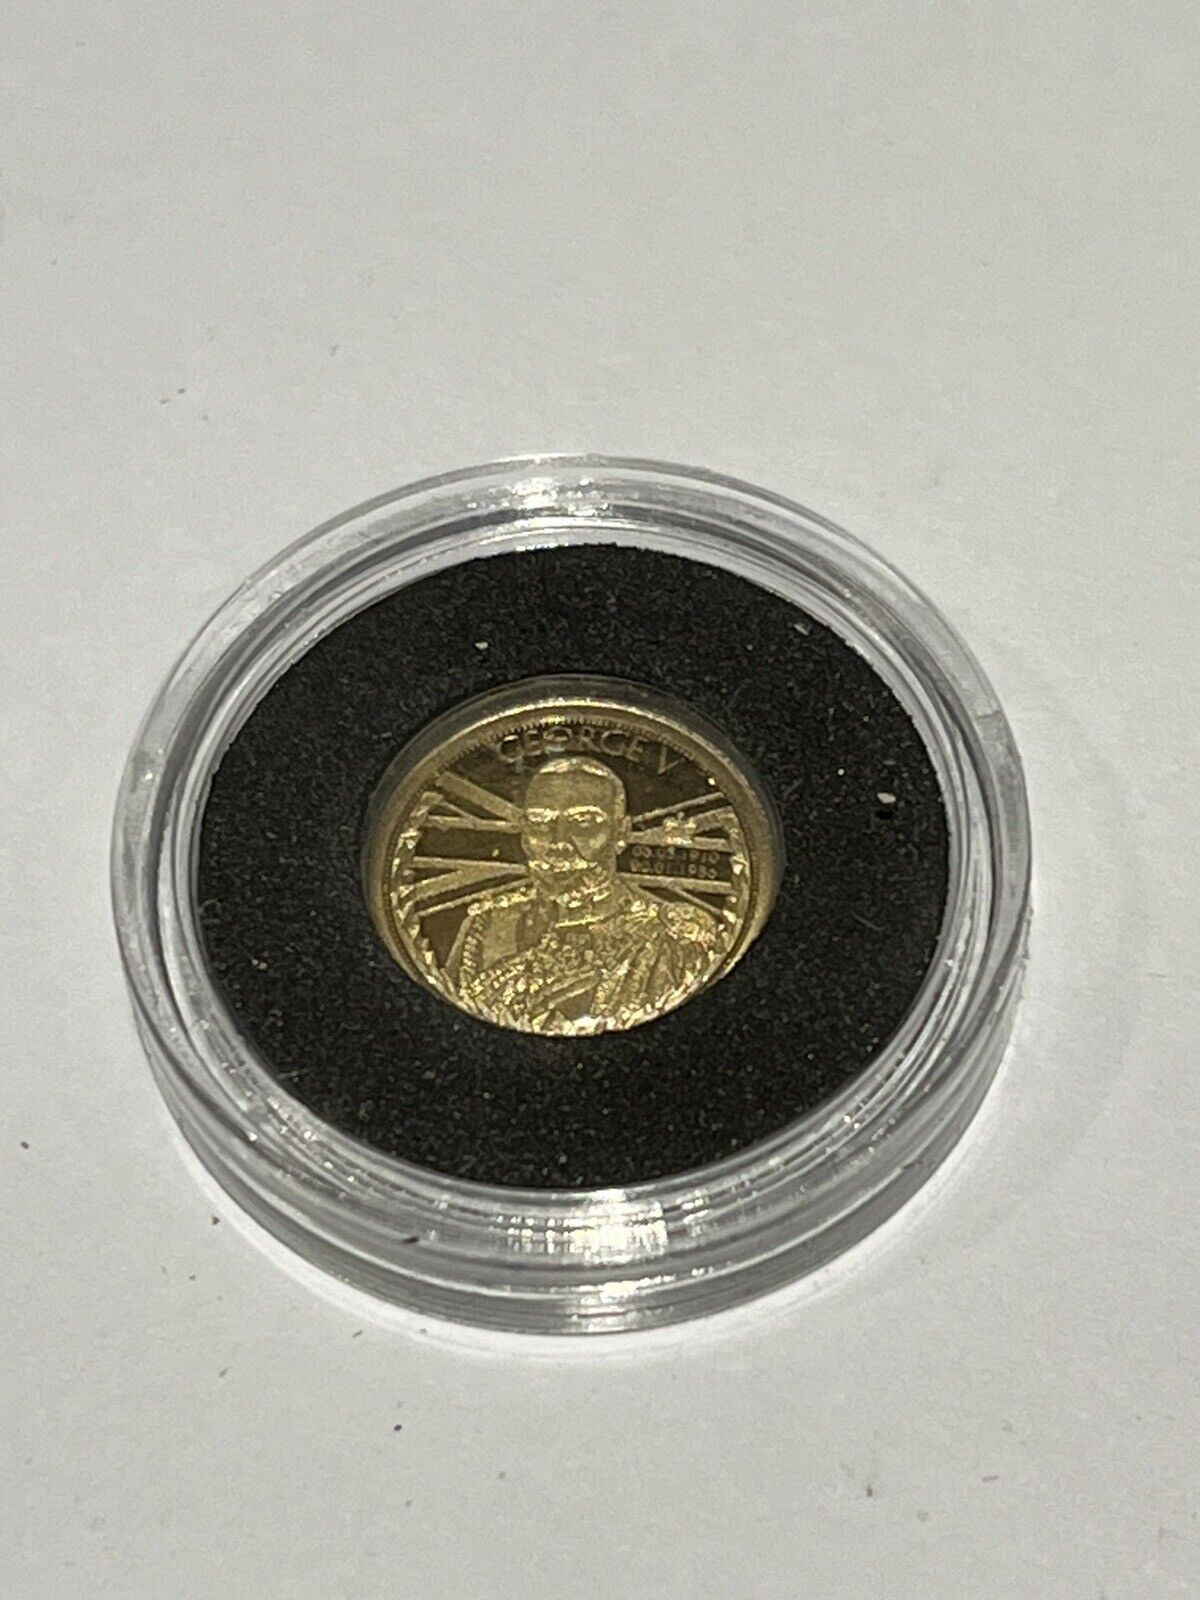 14 Ct Gold Proof Coin. Year Of The Kings Series, 2017 0.5g